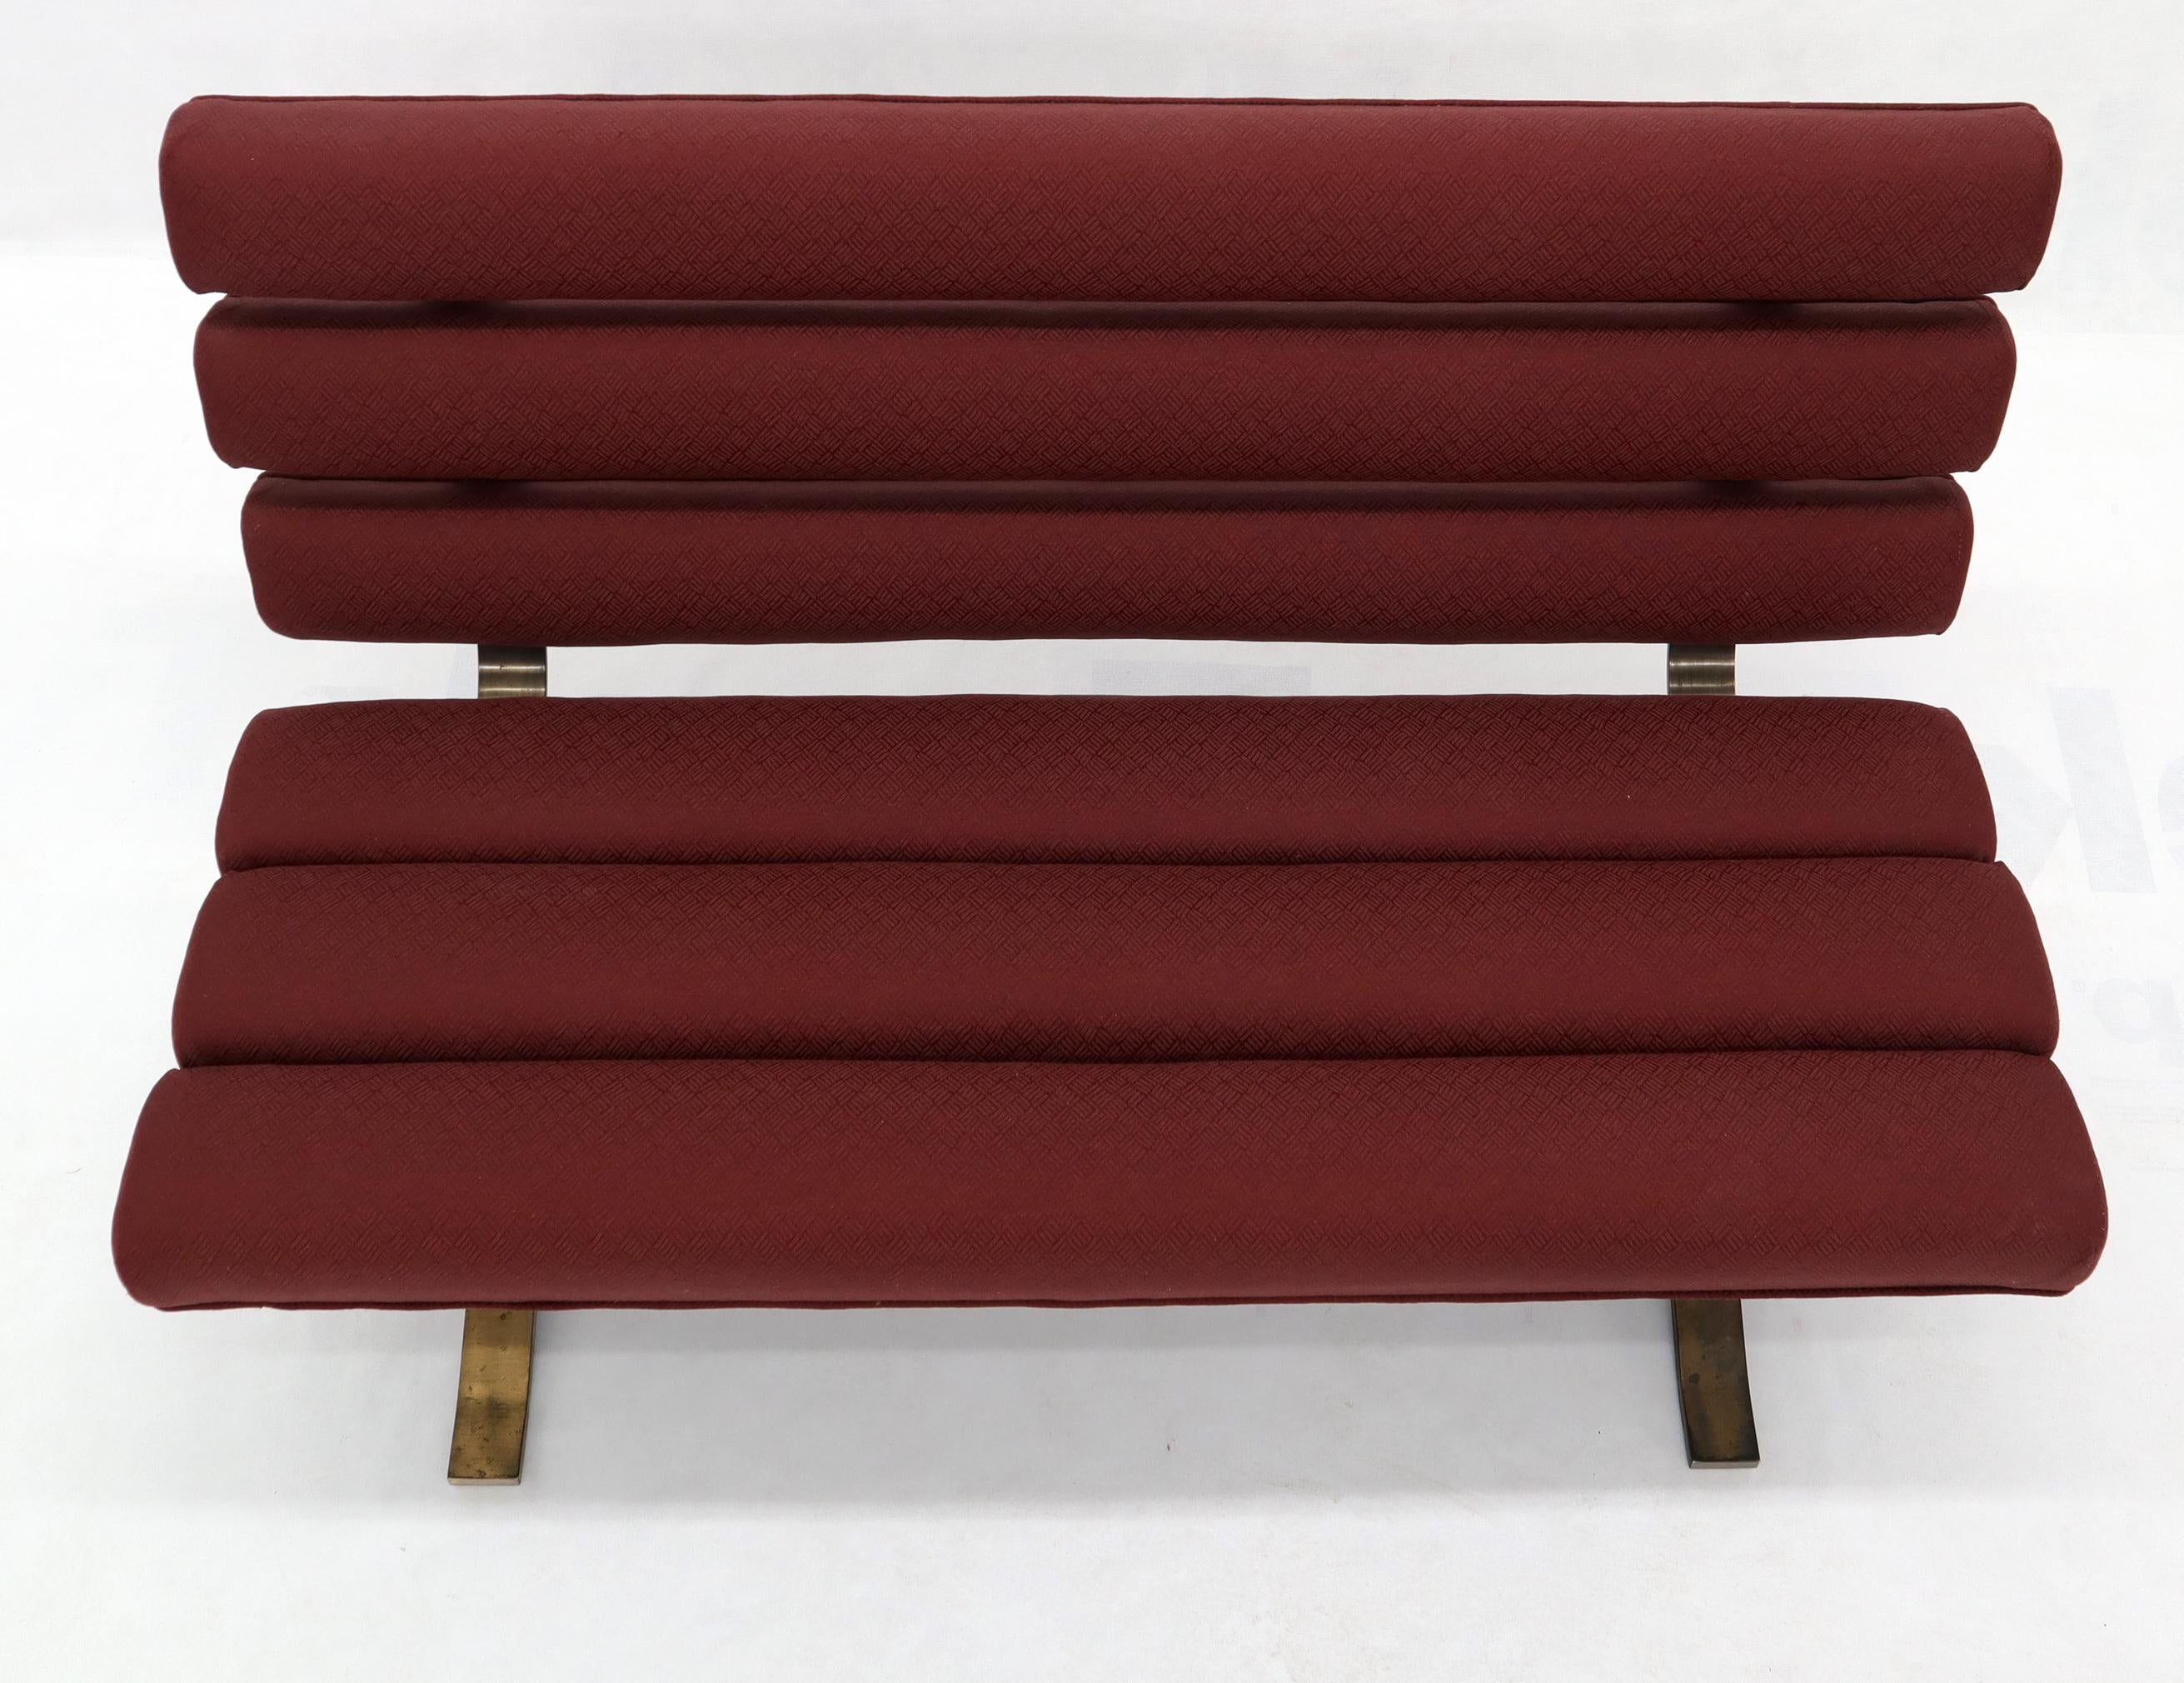 Red Upholstery Bronze Base Bench Settee by Gerald McCabe In Good Condition For Sale In Rockaway, NJ